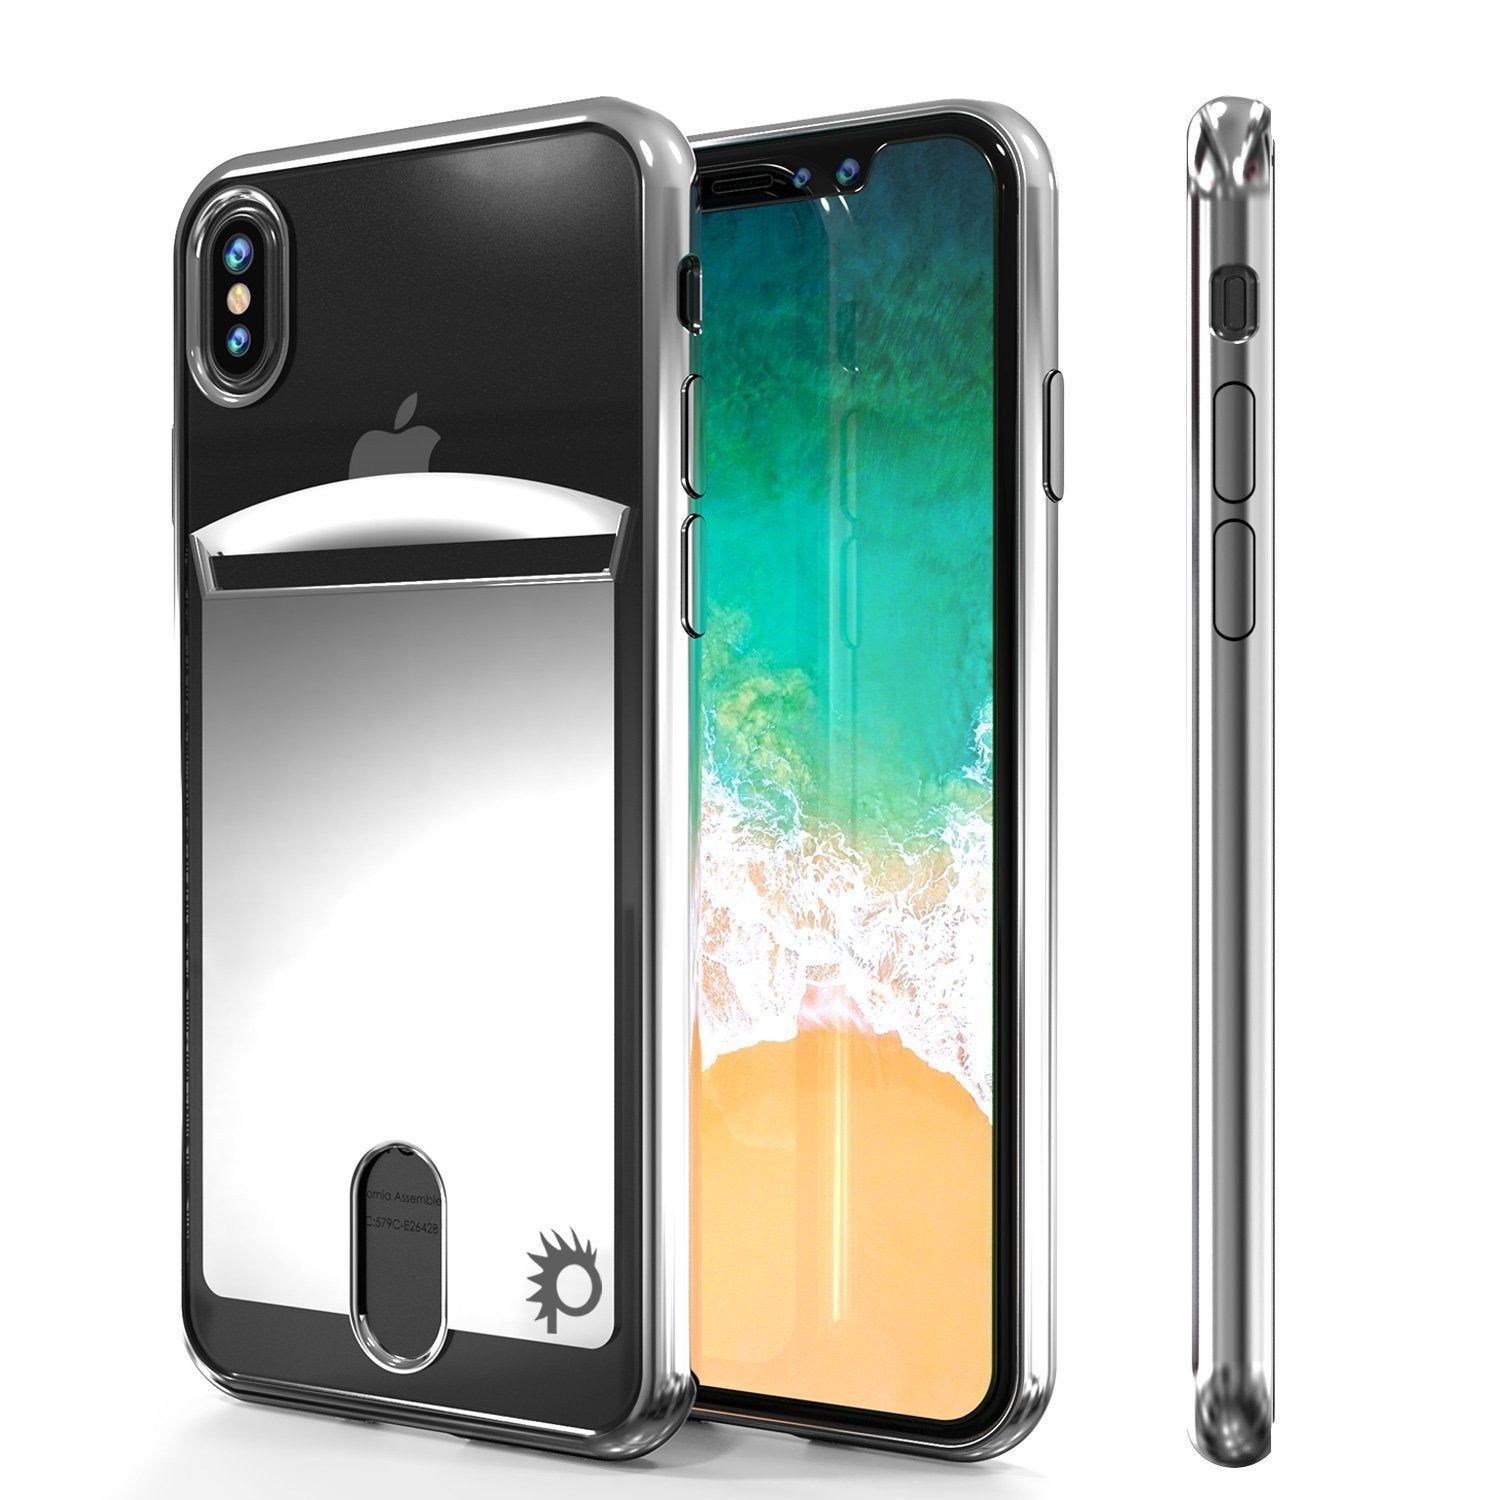 iPhone X Punkcase, LUCID Series Slim Fit Protective Dual Layer, Silver